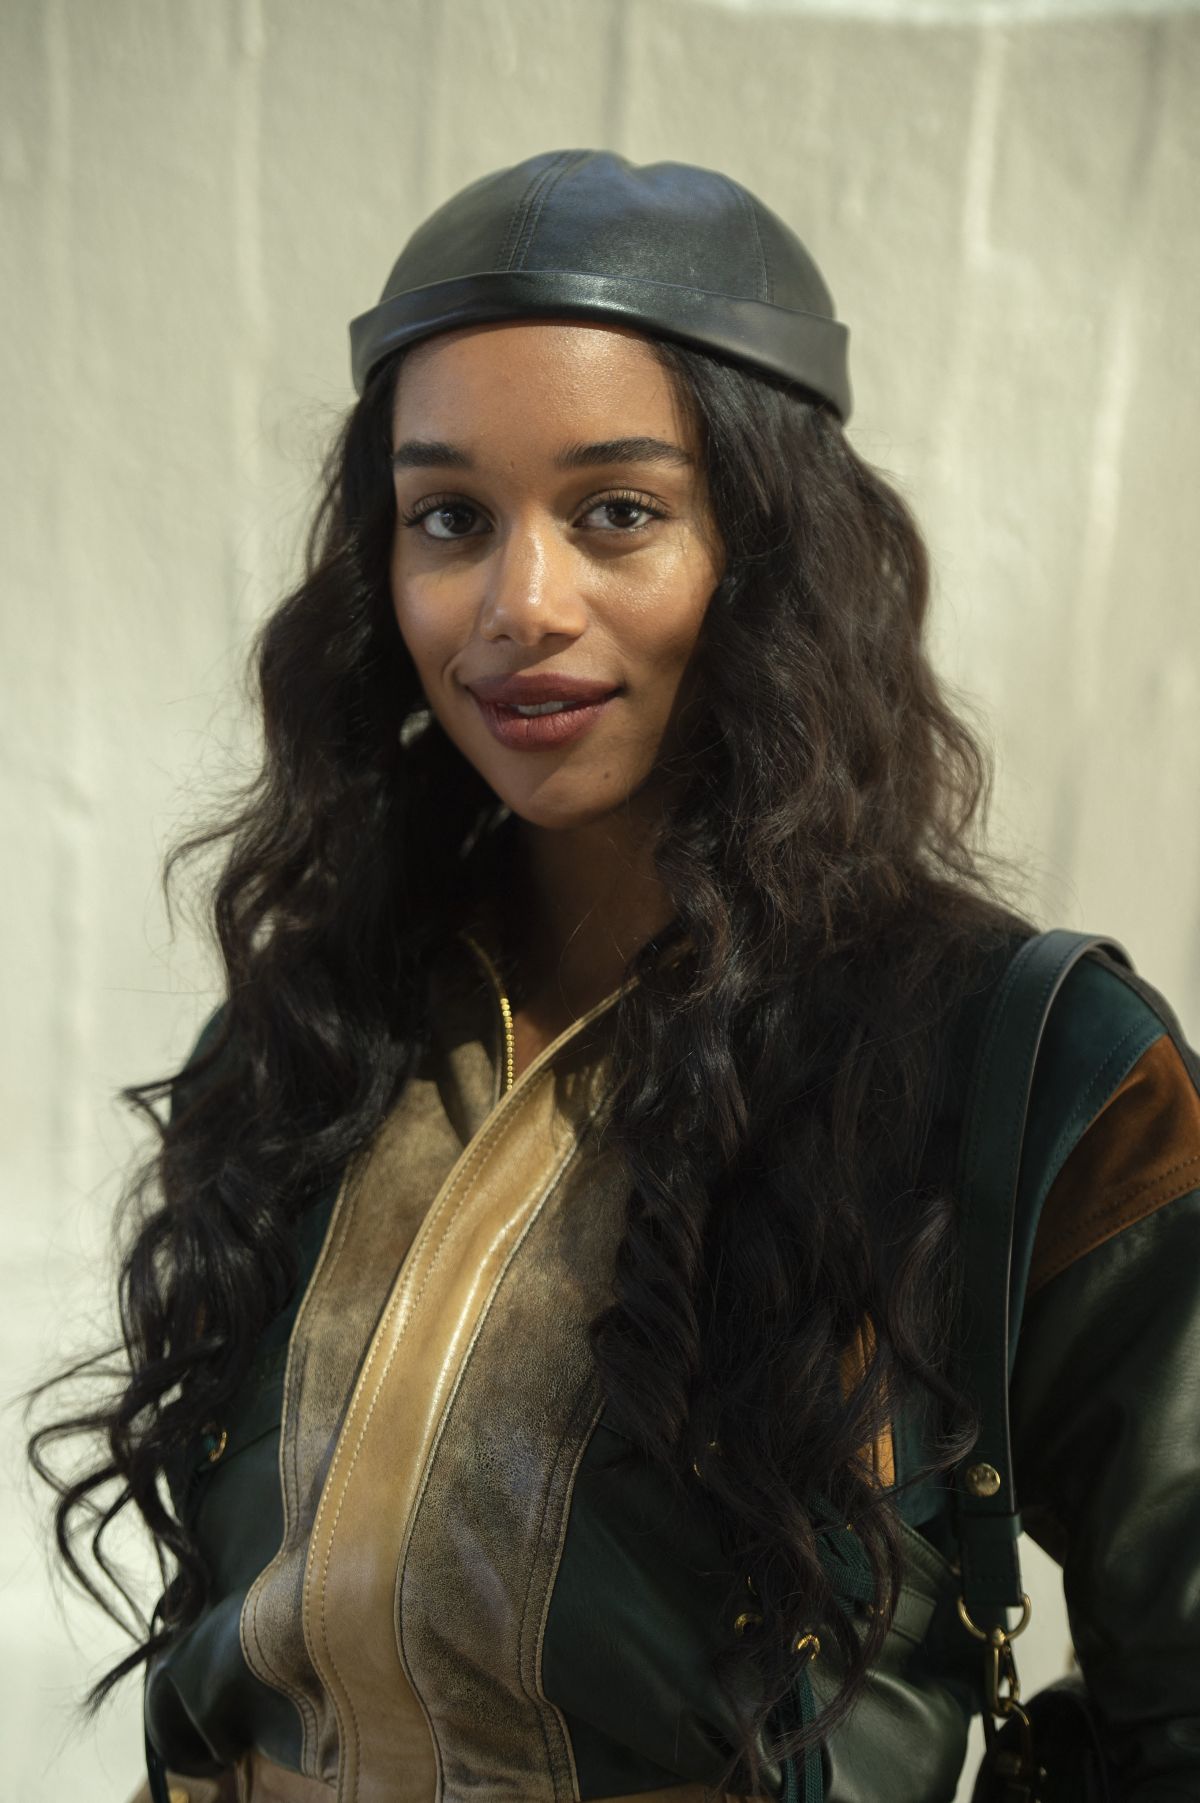 LAURA HARRIER at Louis Vuitton Cruise 2020 Fashion Show at JFK Airport in New Yokr 05/08/2019 ...